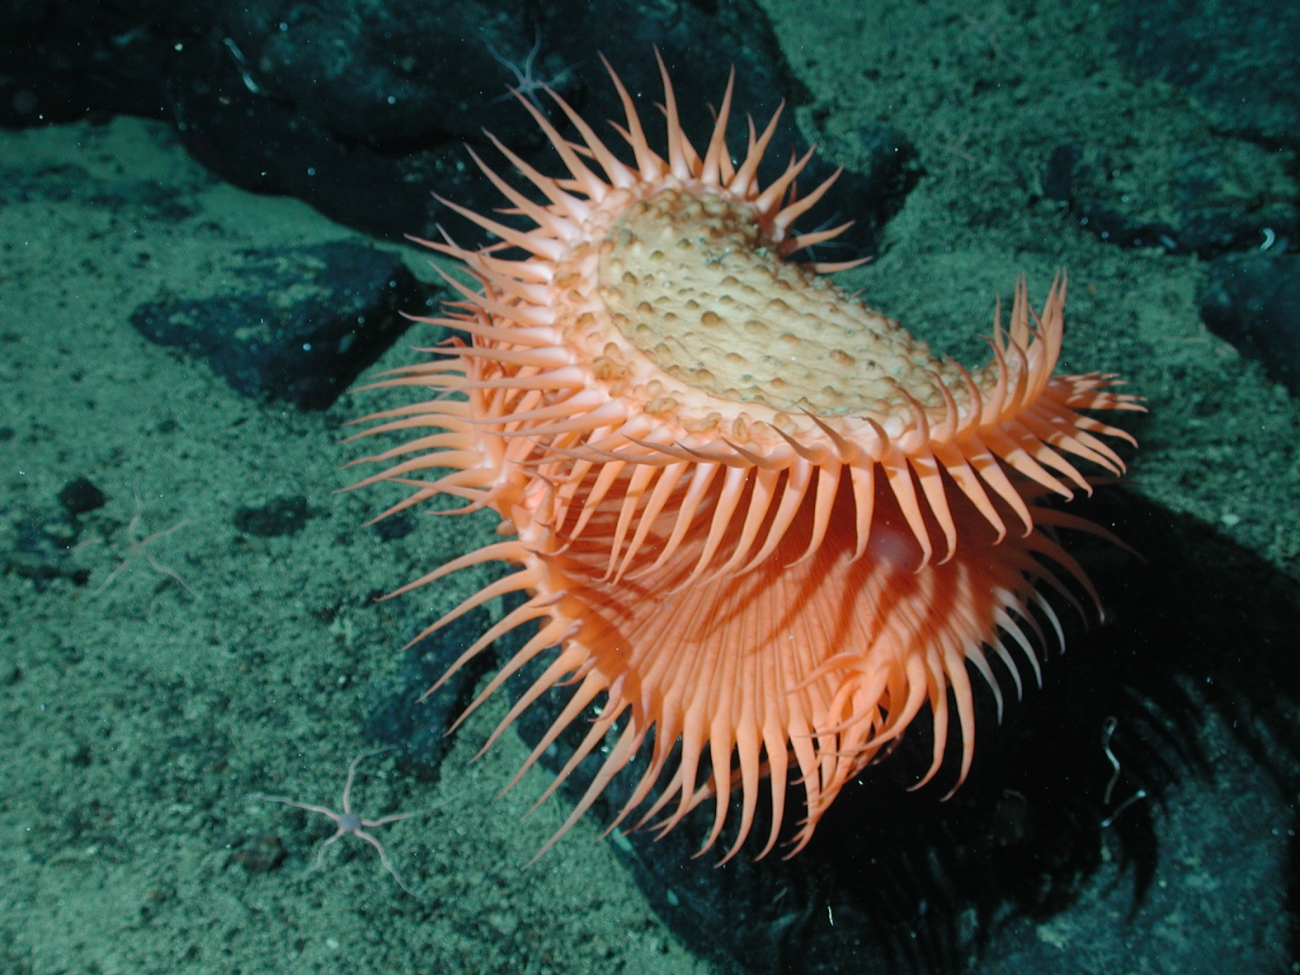 An unidentified cnidarian that resembles a Venus flytrap from the family Hormathiidae